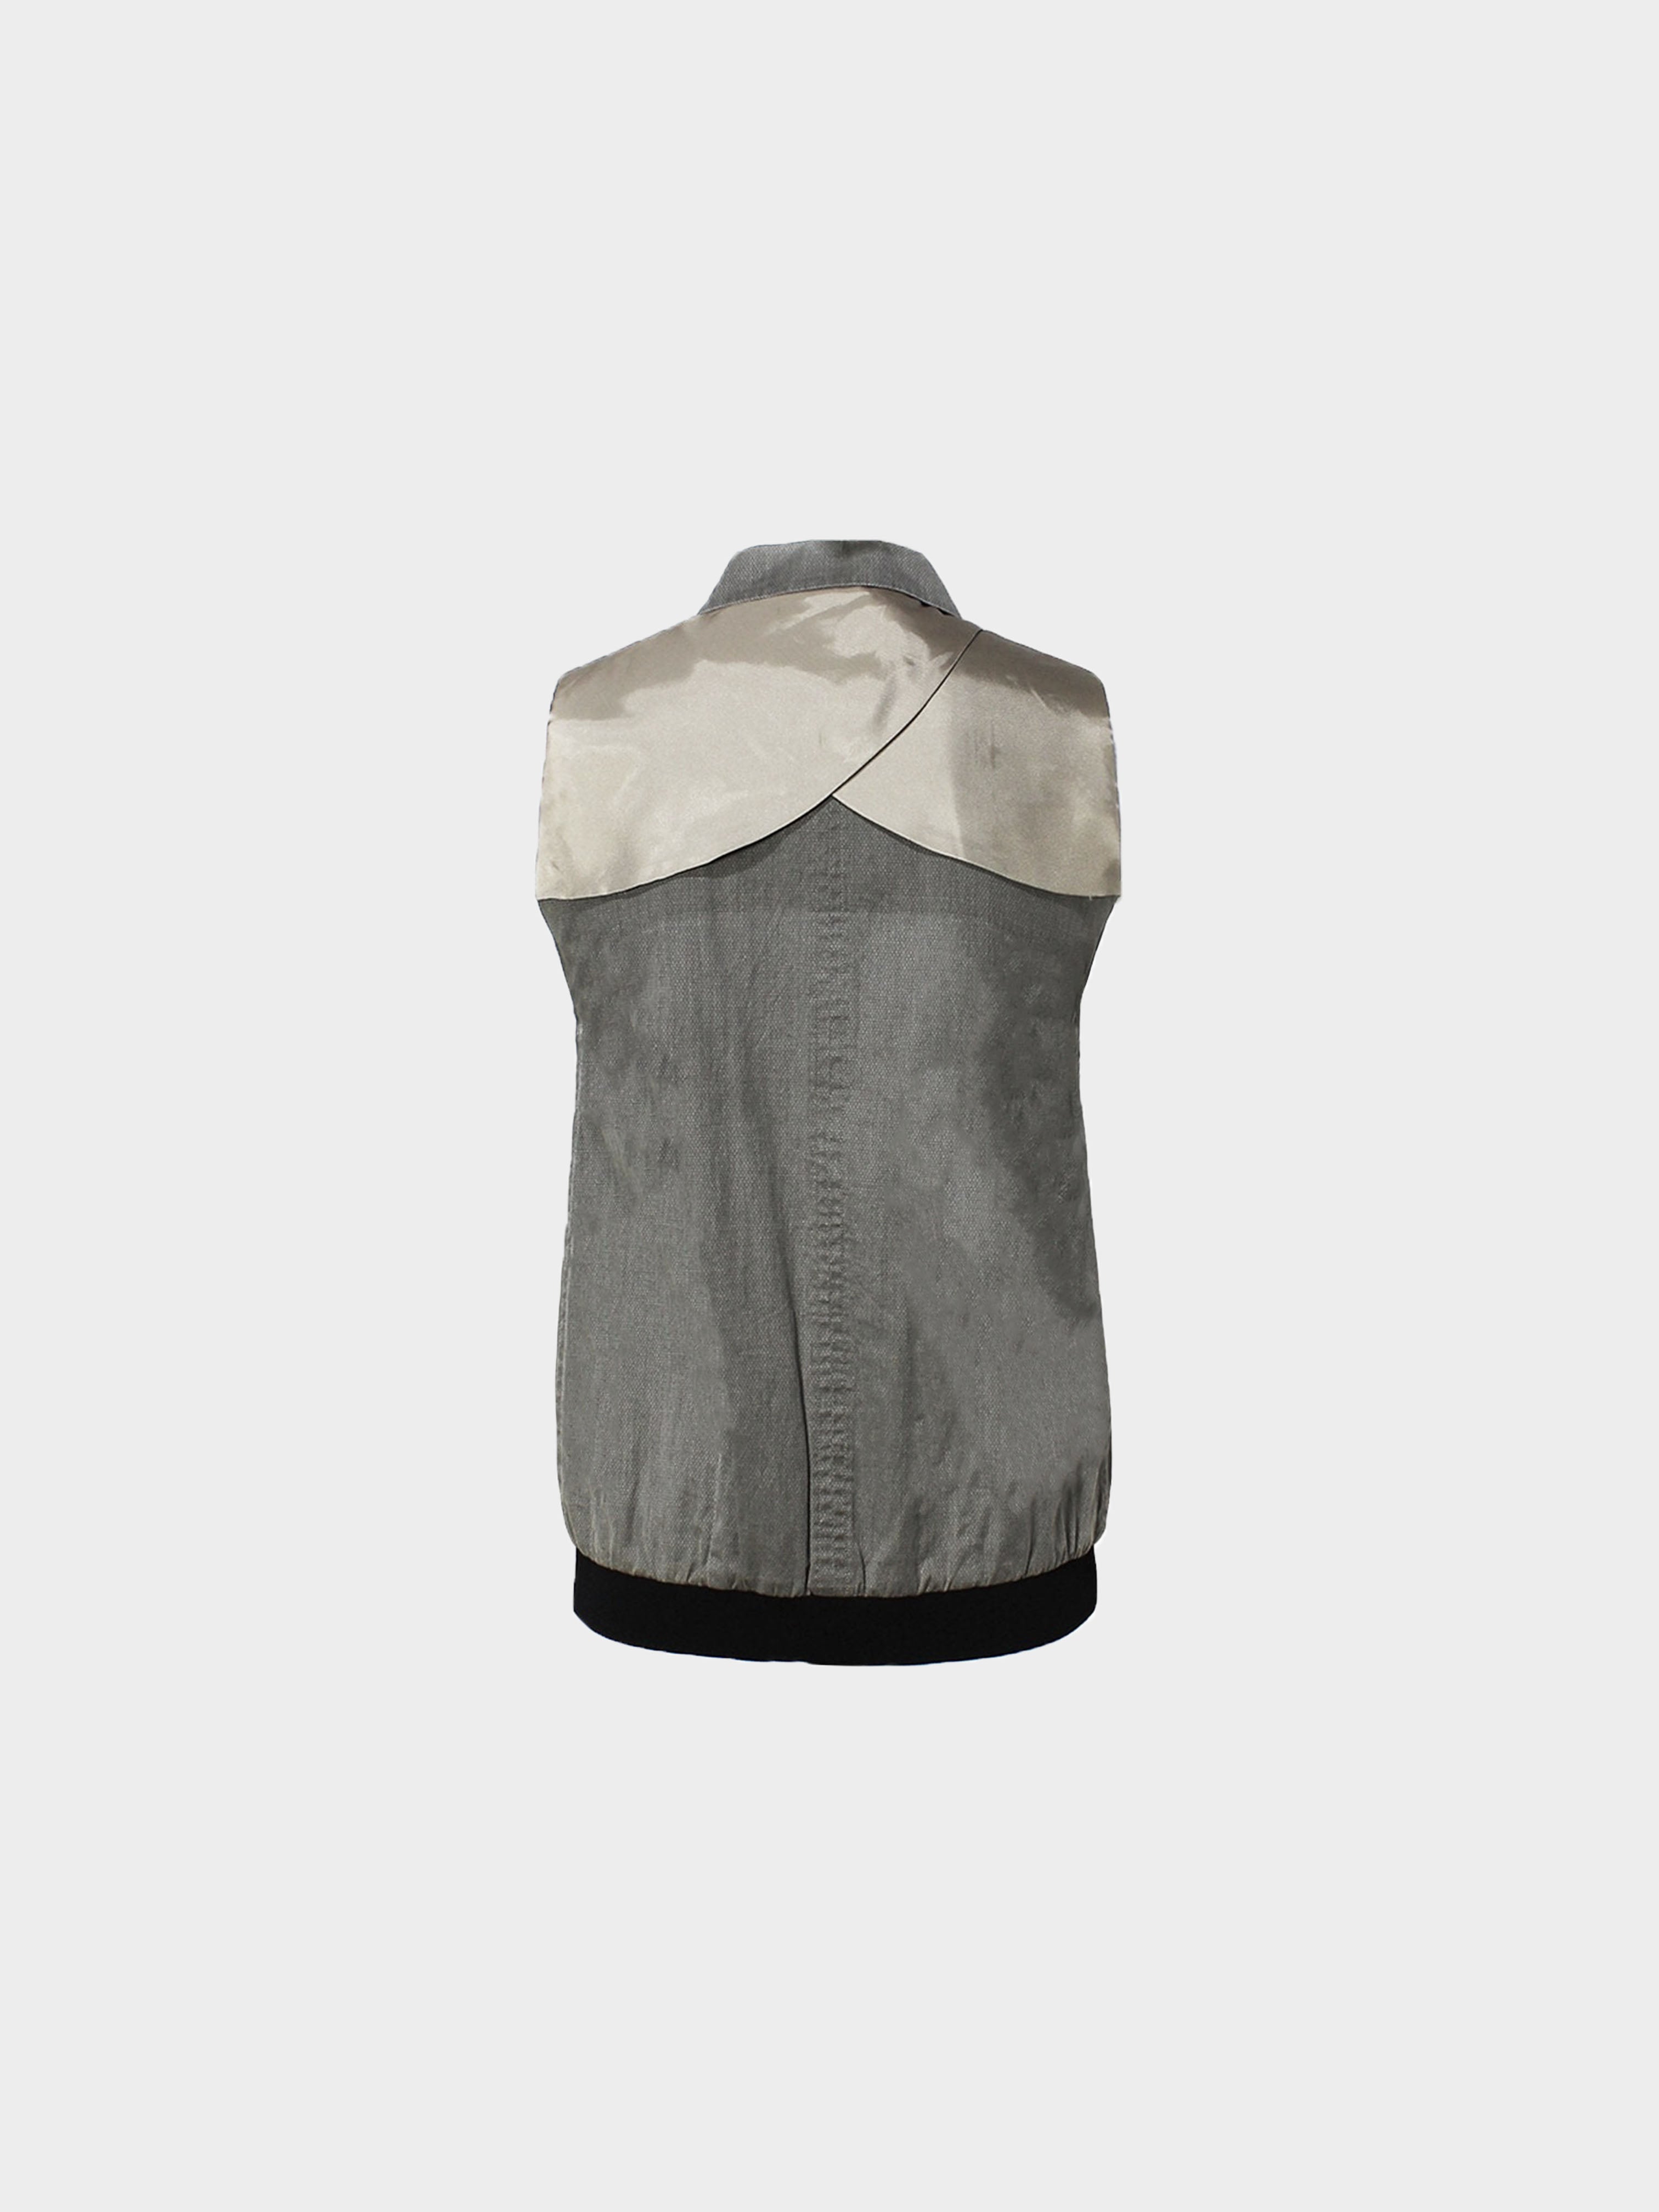 Undercover Patch Applique Sleeveless Jacket in Gray for Men